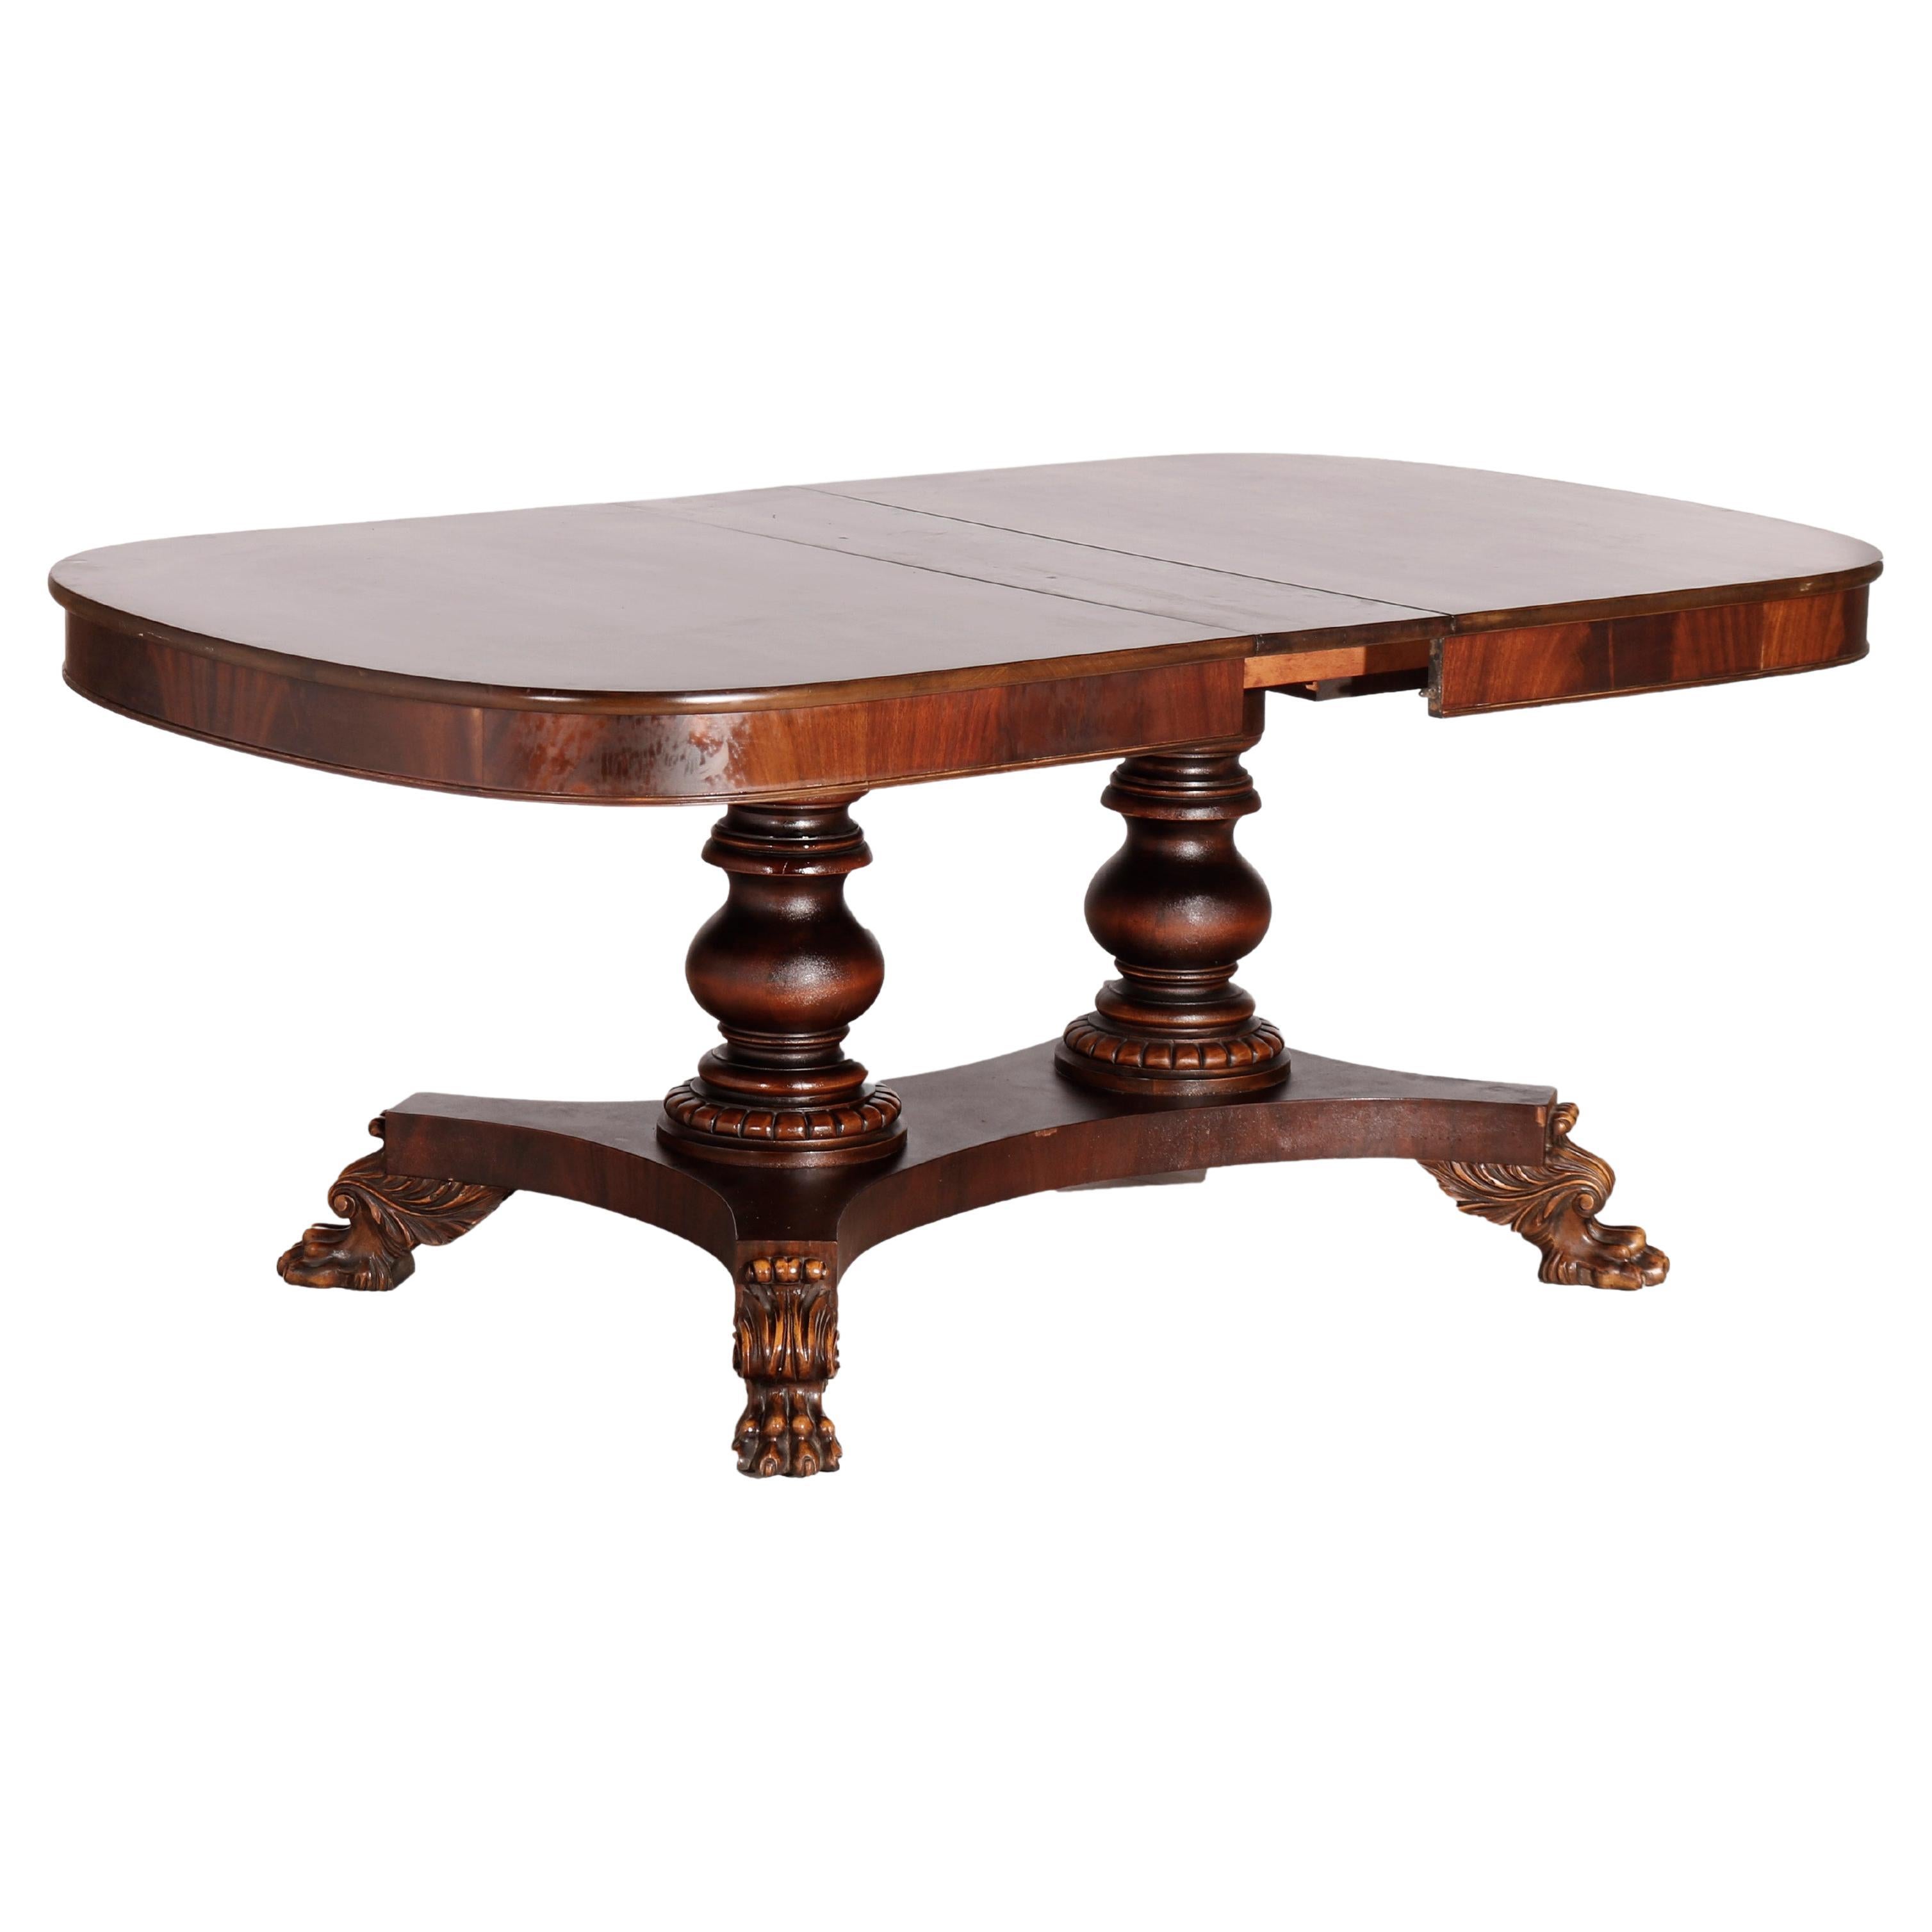 An antique American Empire Berkey & Gay extension banquet dining table offers mahogany construction with deep skirt over double pedestal base and raised on carved paw feet, includes three 10